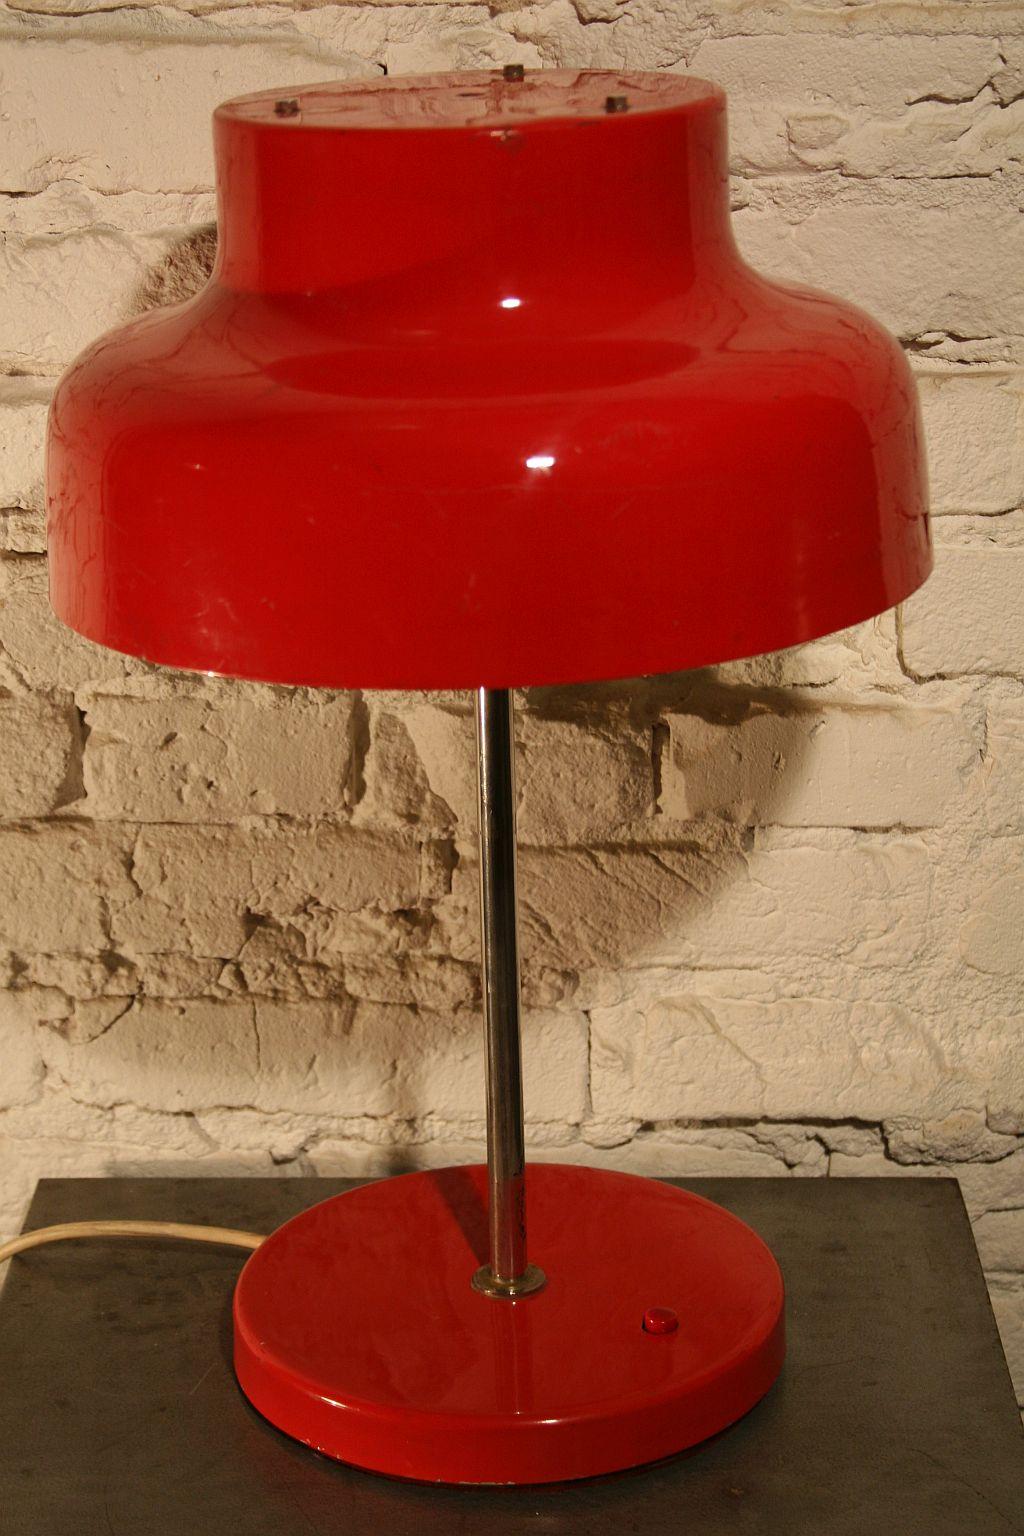 A large table lamp designed by Anders Pehrson representative of the midcentury Scandinavian Modern style.
Original red varnish, original electrical installation, lamp powered by three bulbs with E 27 thread. Lamp has normal signs of use scratches